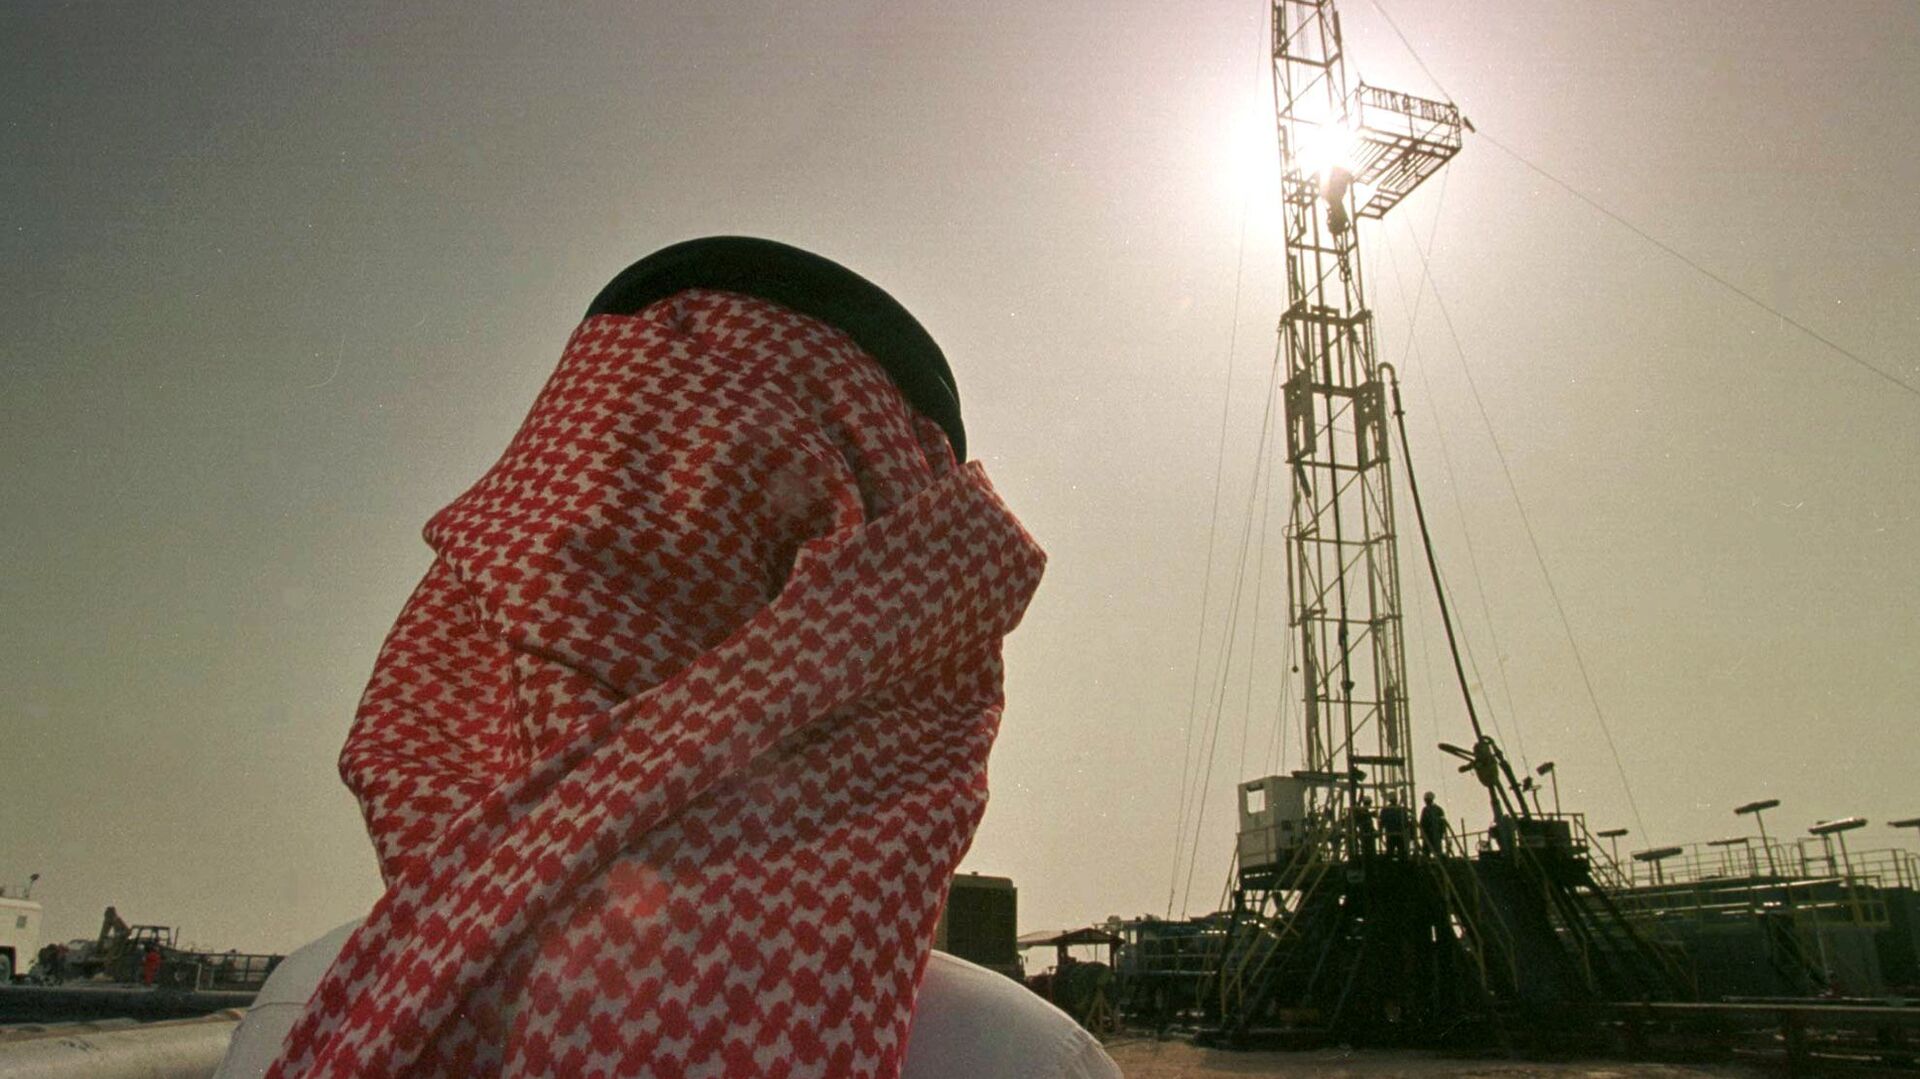 Khaled al Otaiby, an official of the Saudi oil company Aramco watches progress at a rig at the al-Howta oil field. - Sputnik International, 1920, 08.08.2021